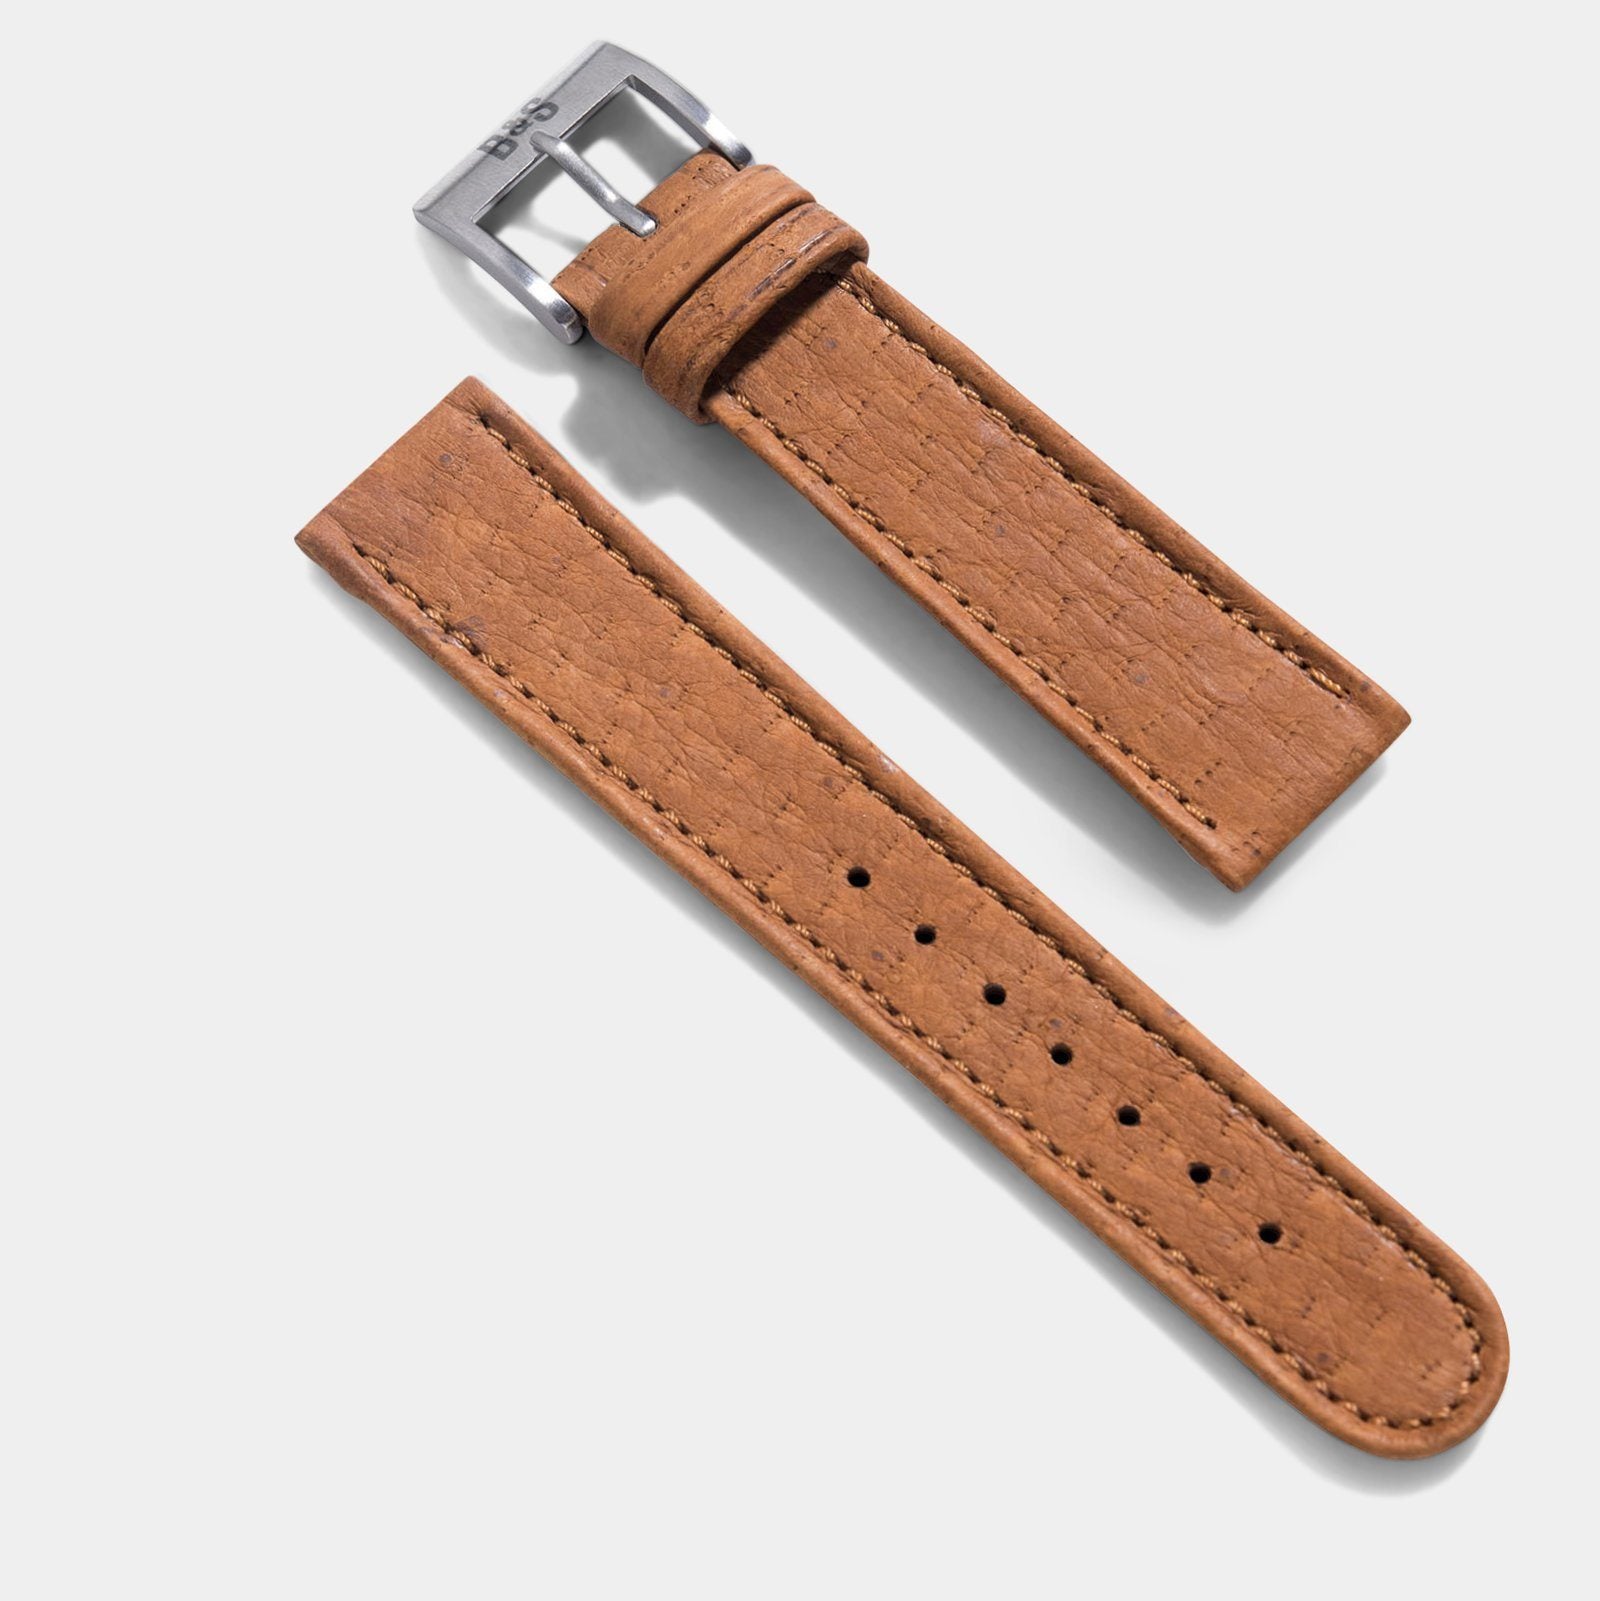 Watch Straps: The Complete Guide To Every Great Style